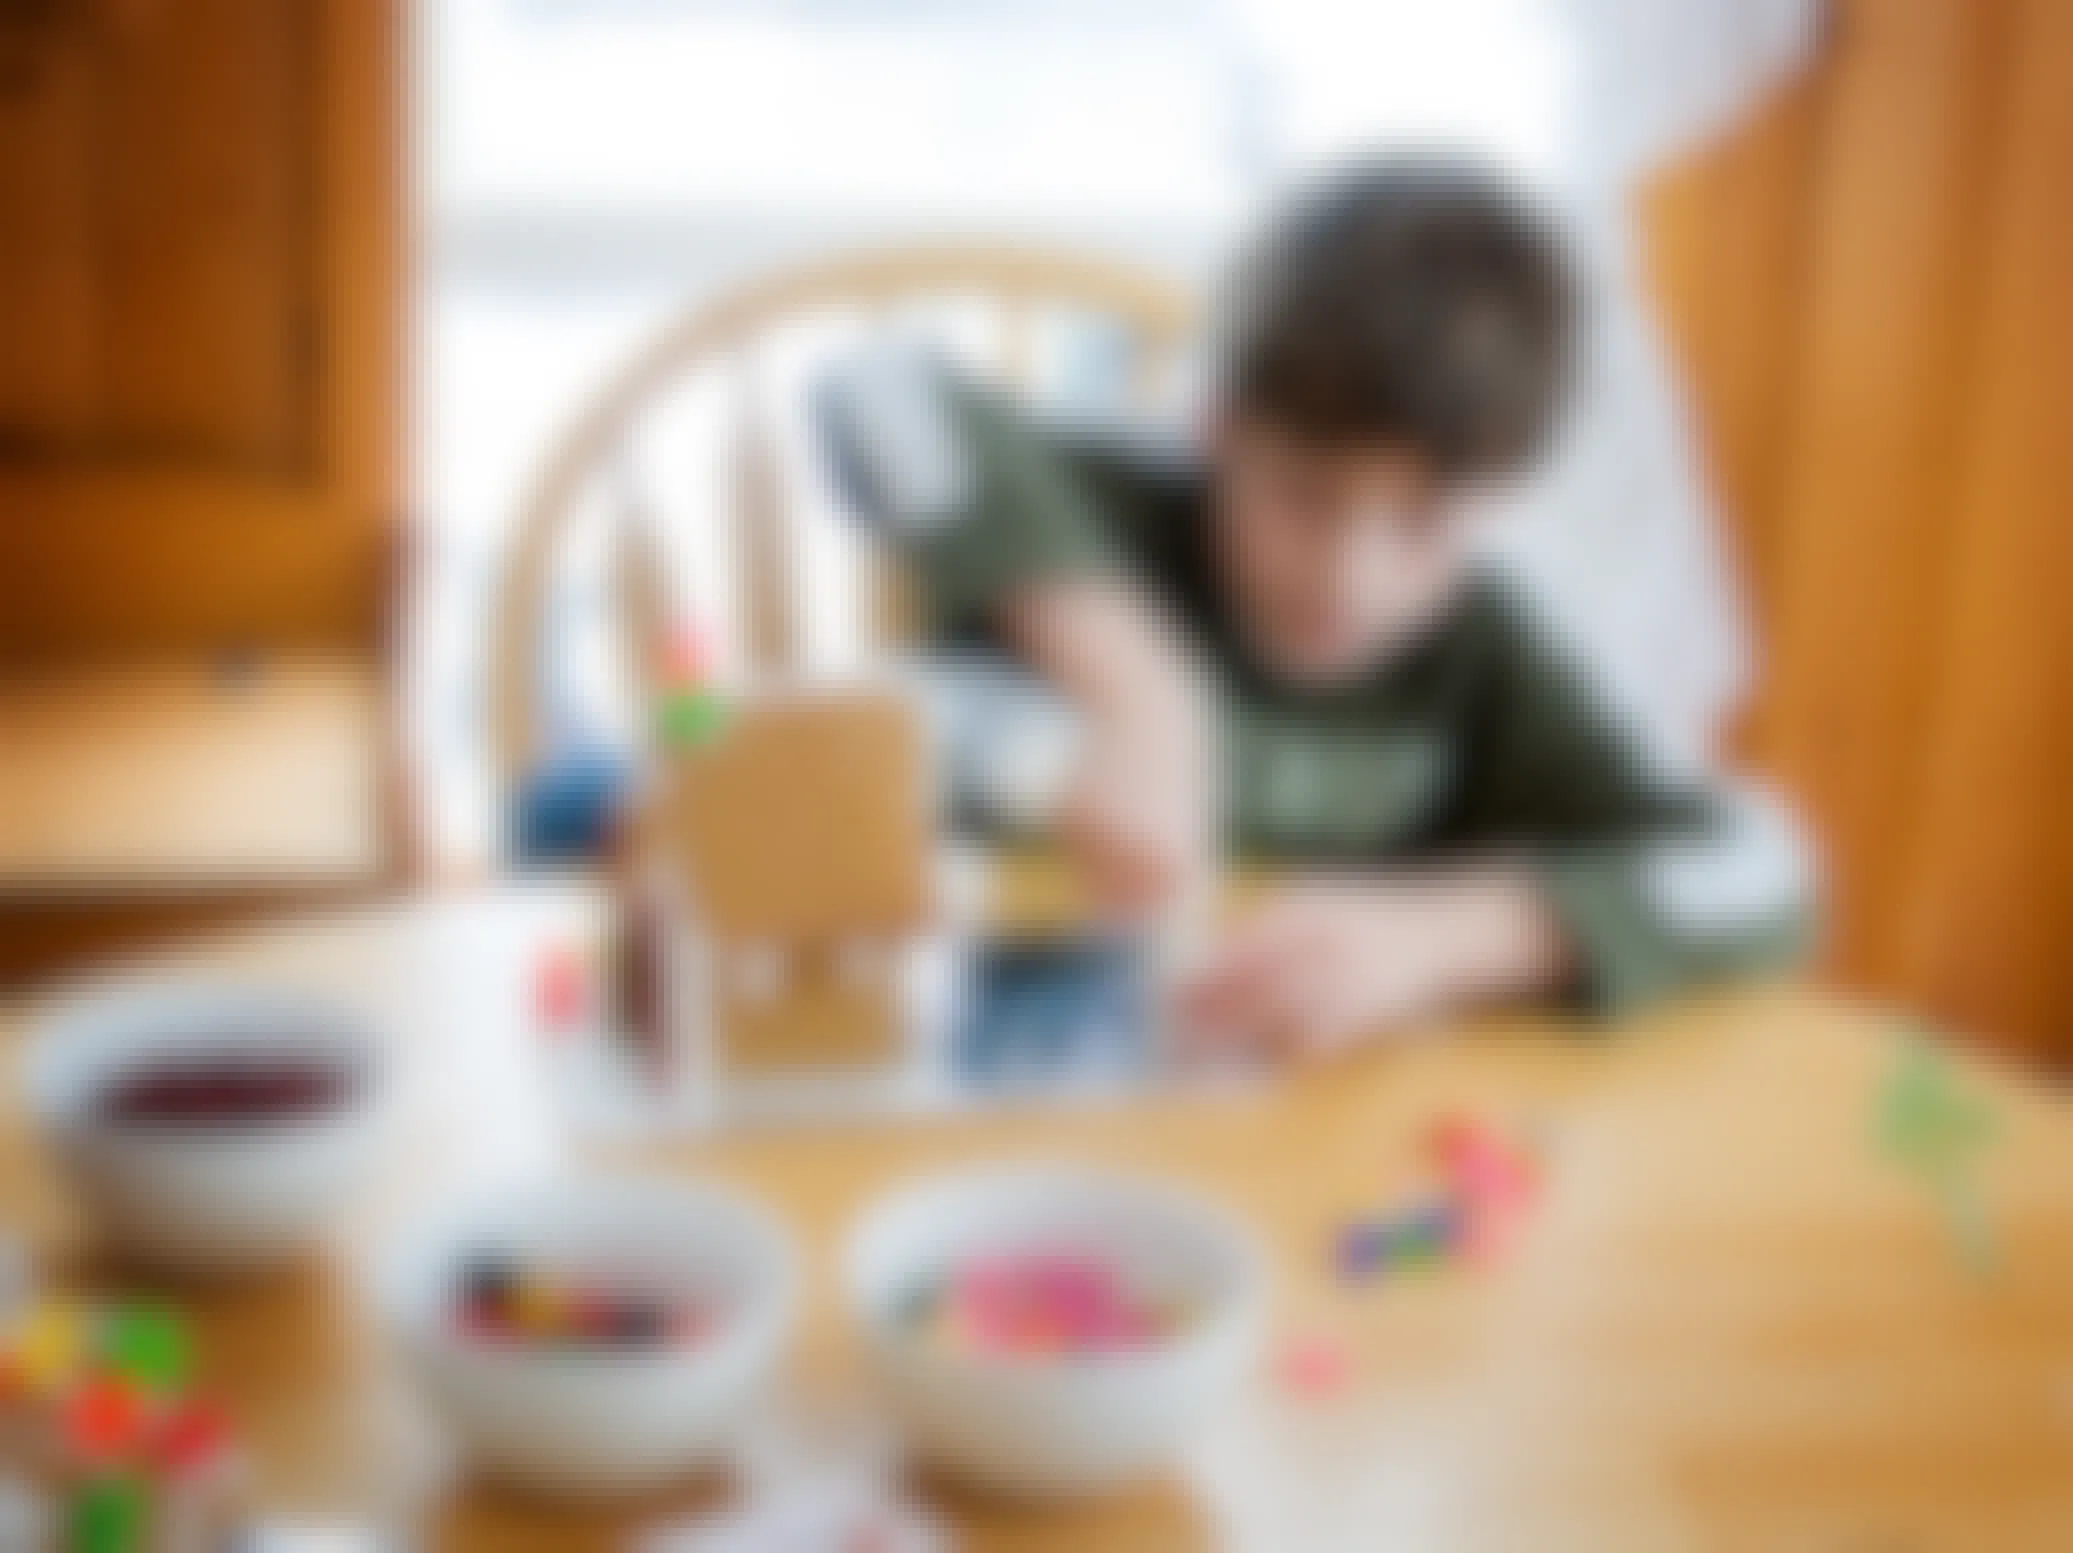 A young boy working on decorating a gingerbread house with bowls of different candies on the table.